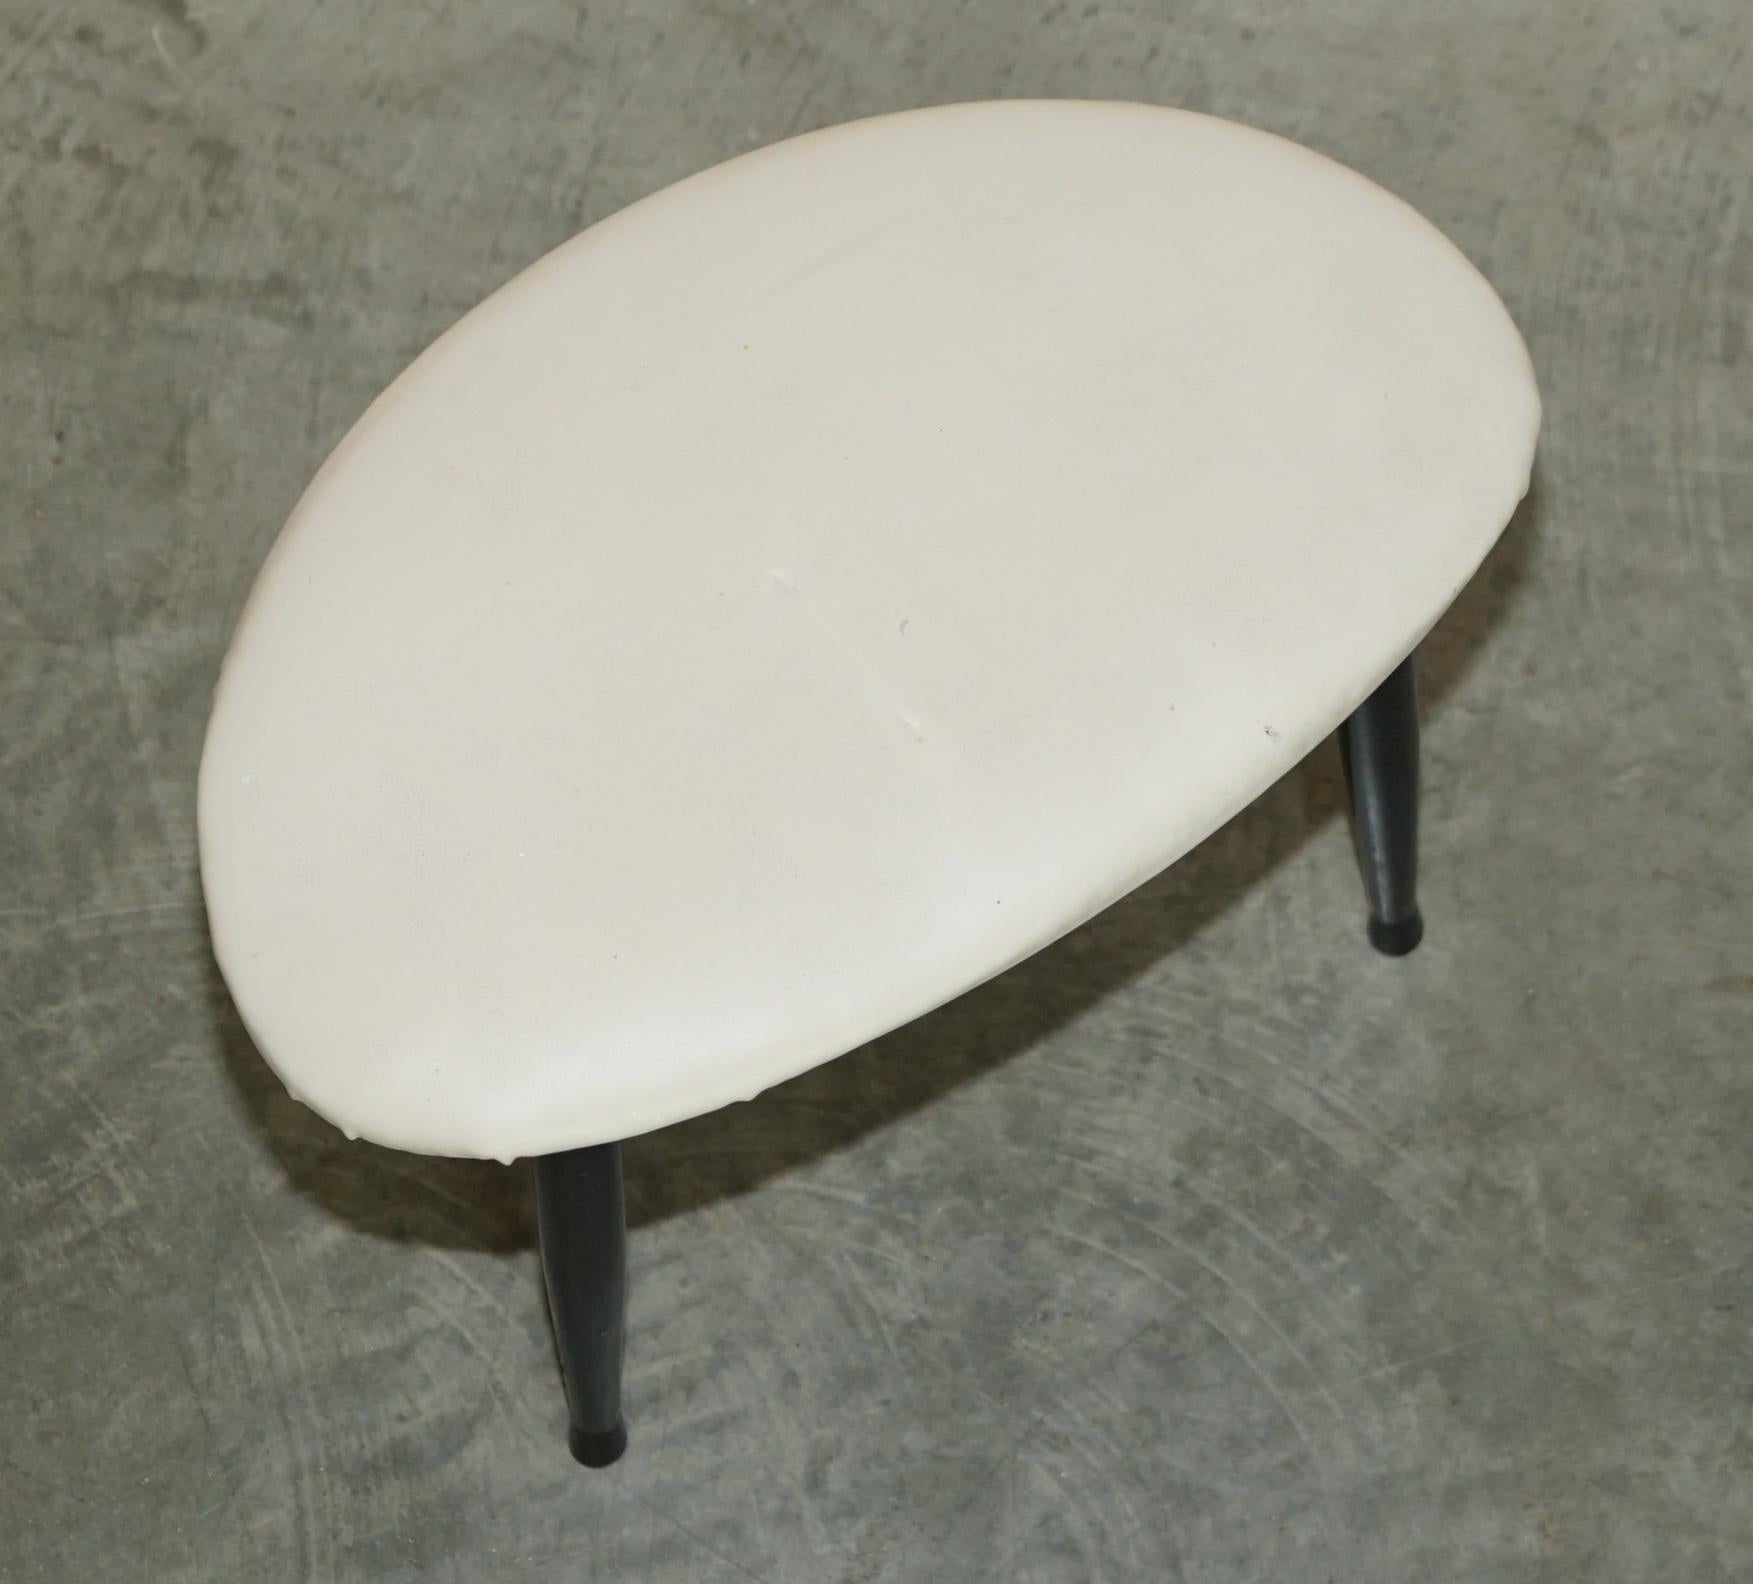 We are delighted to offer for sale this vintage mid century modern kidney shaped side table in the G-Plan style

A nice small utilitarian table, ideally suited for a glass of wine and picture frame

We have deep cleaned, hand condition waxed and